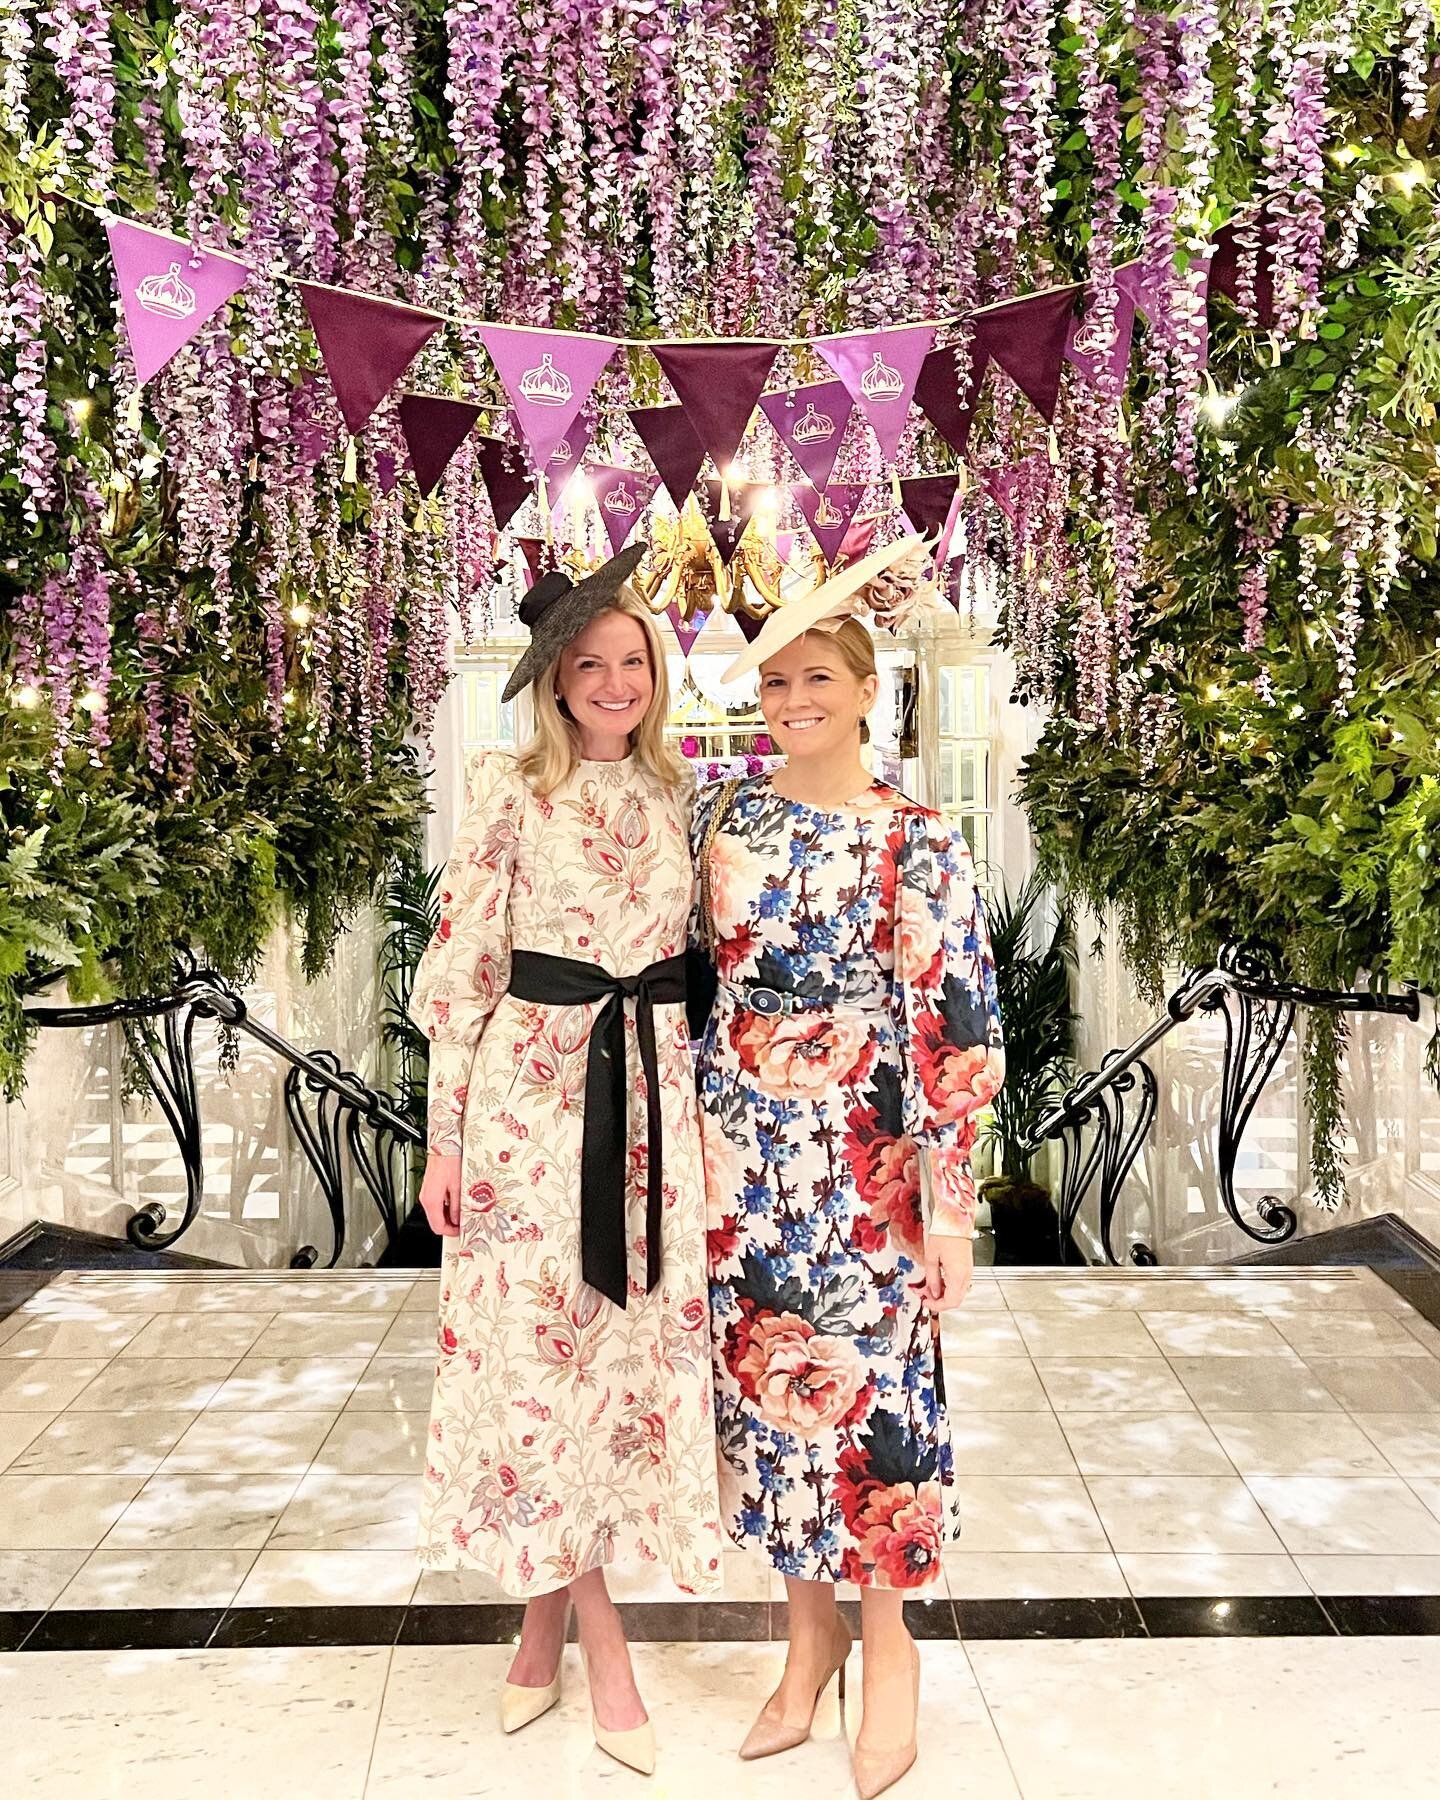 Had to show off the beautiful lobby decor and flower installation from our amazing hotel hosts at @thesavoylondon. The first luxury hotel in London, The Savoy sits directly on the River Thames with some of the best views in London. It&rsquo;s iconic 